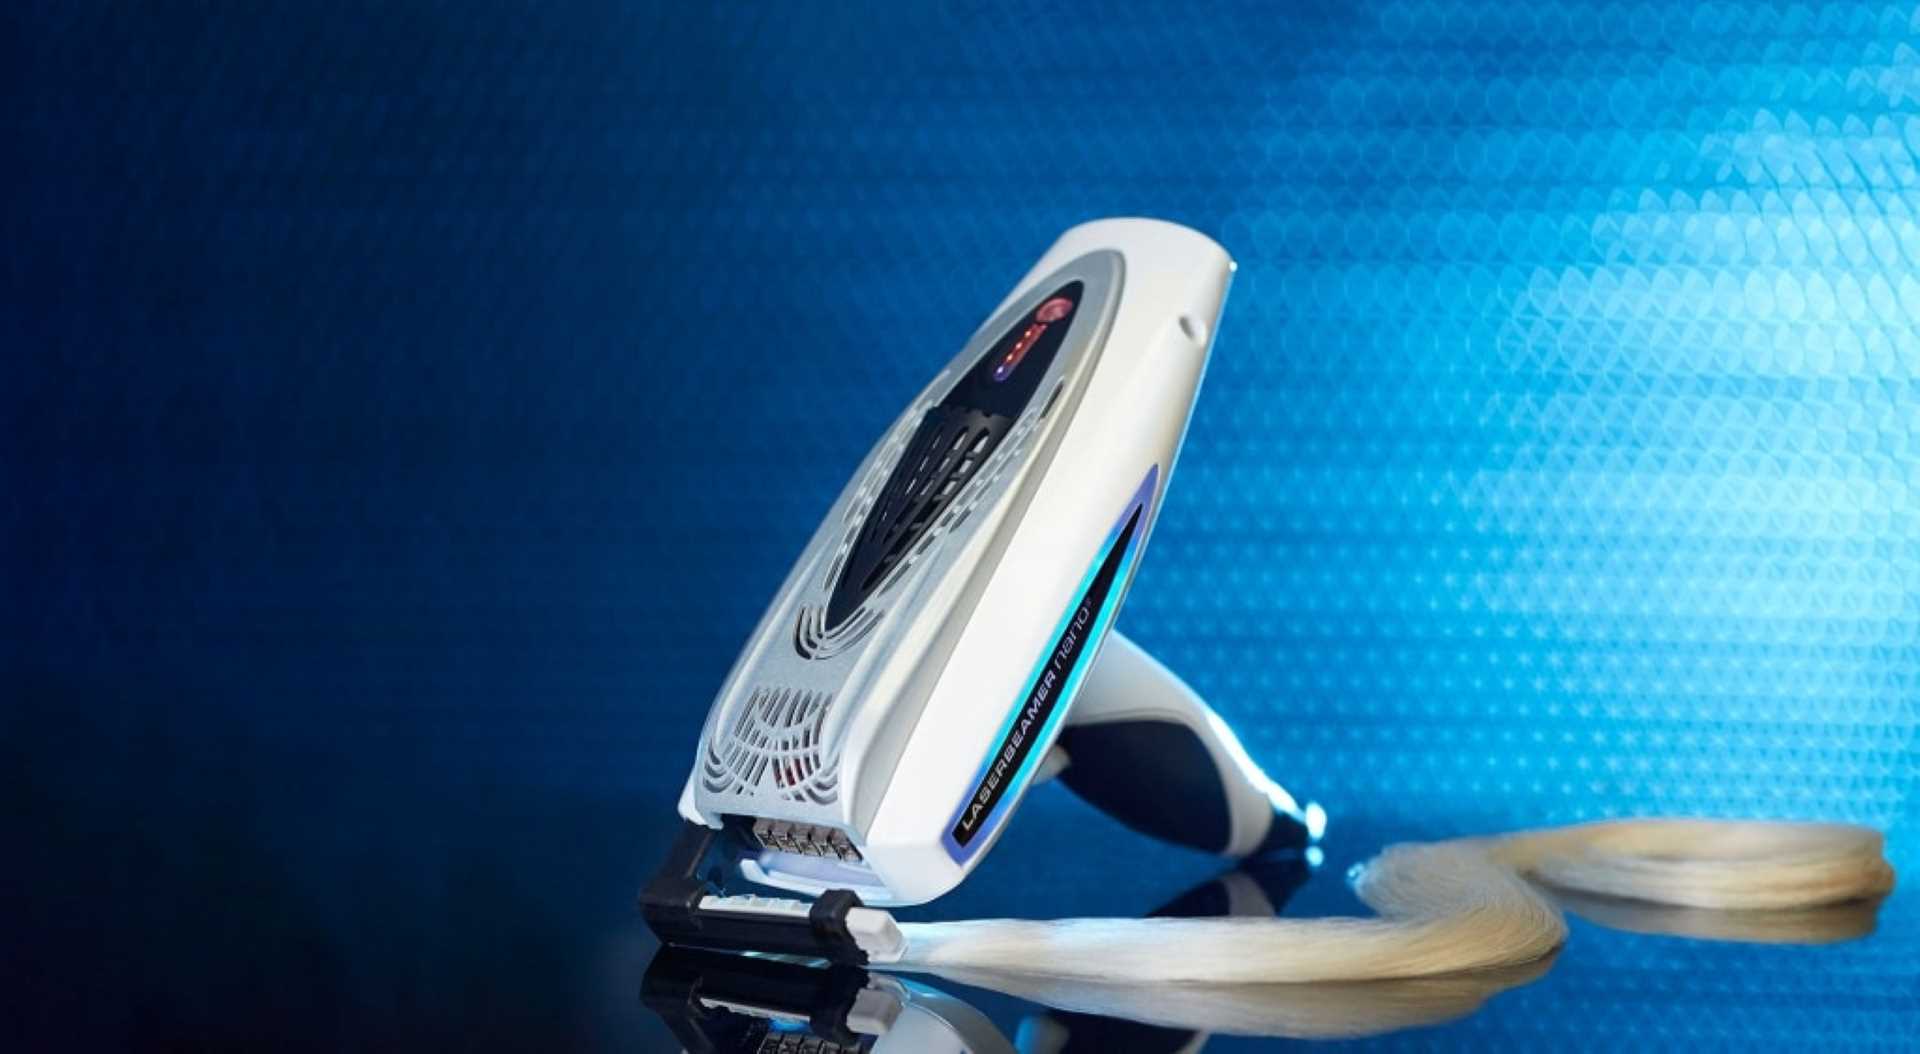 The Laserbeamer Nano applies up to 5 human hair strands at the same time.